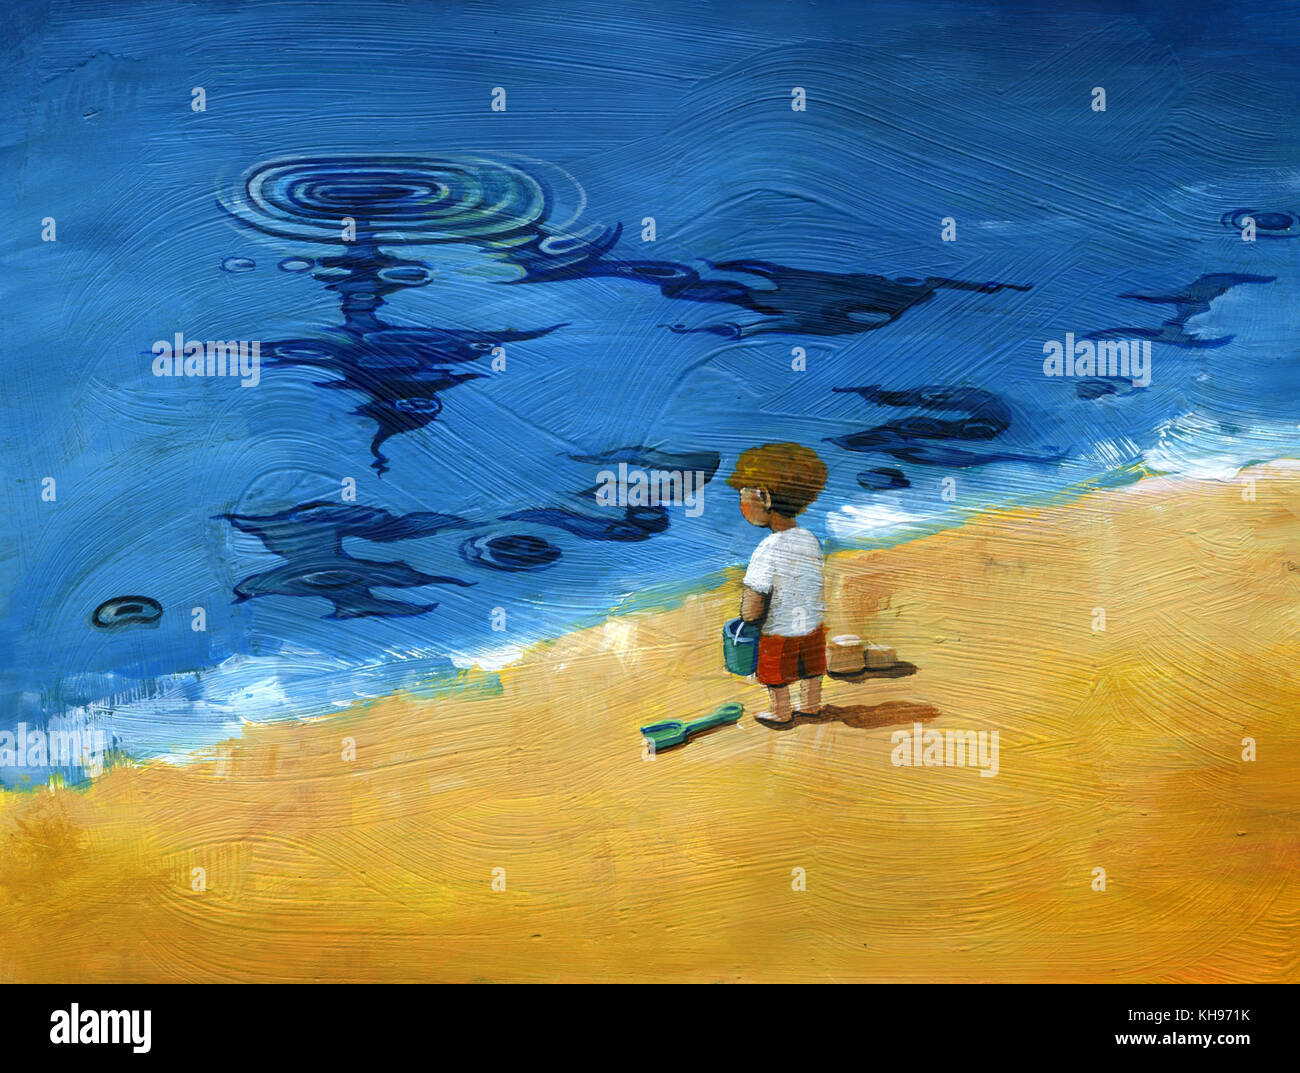 kids loocking the sea see a clock metaphor of time passing surreal painting Stock Photo